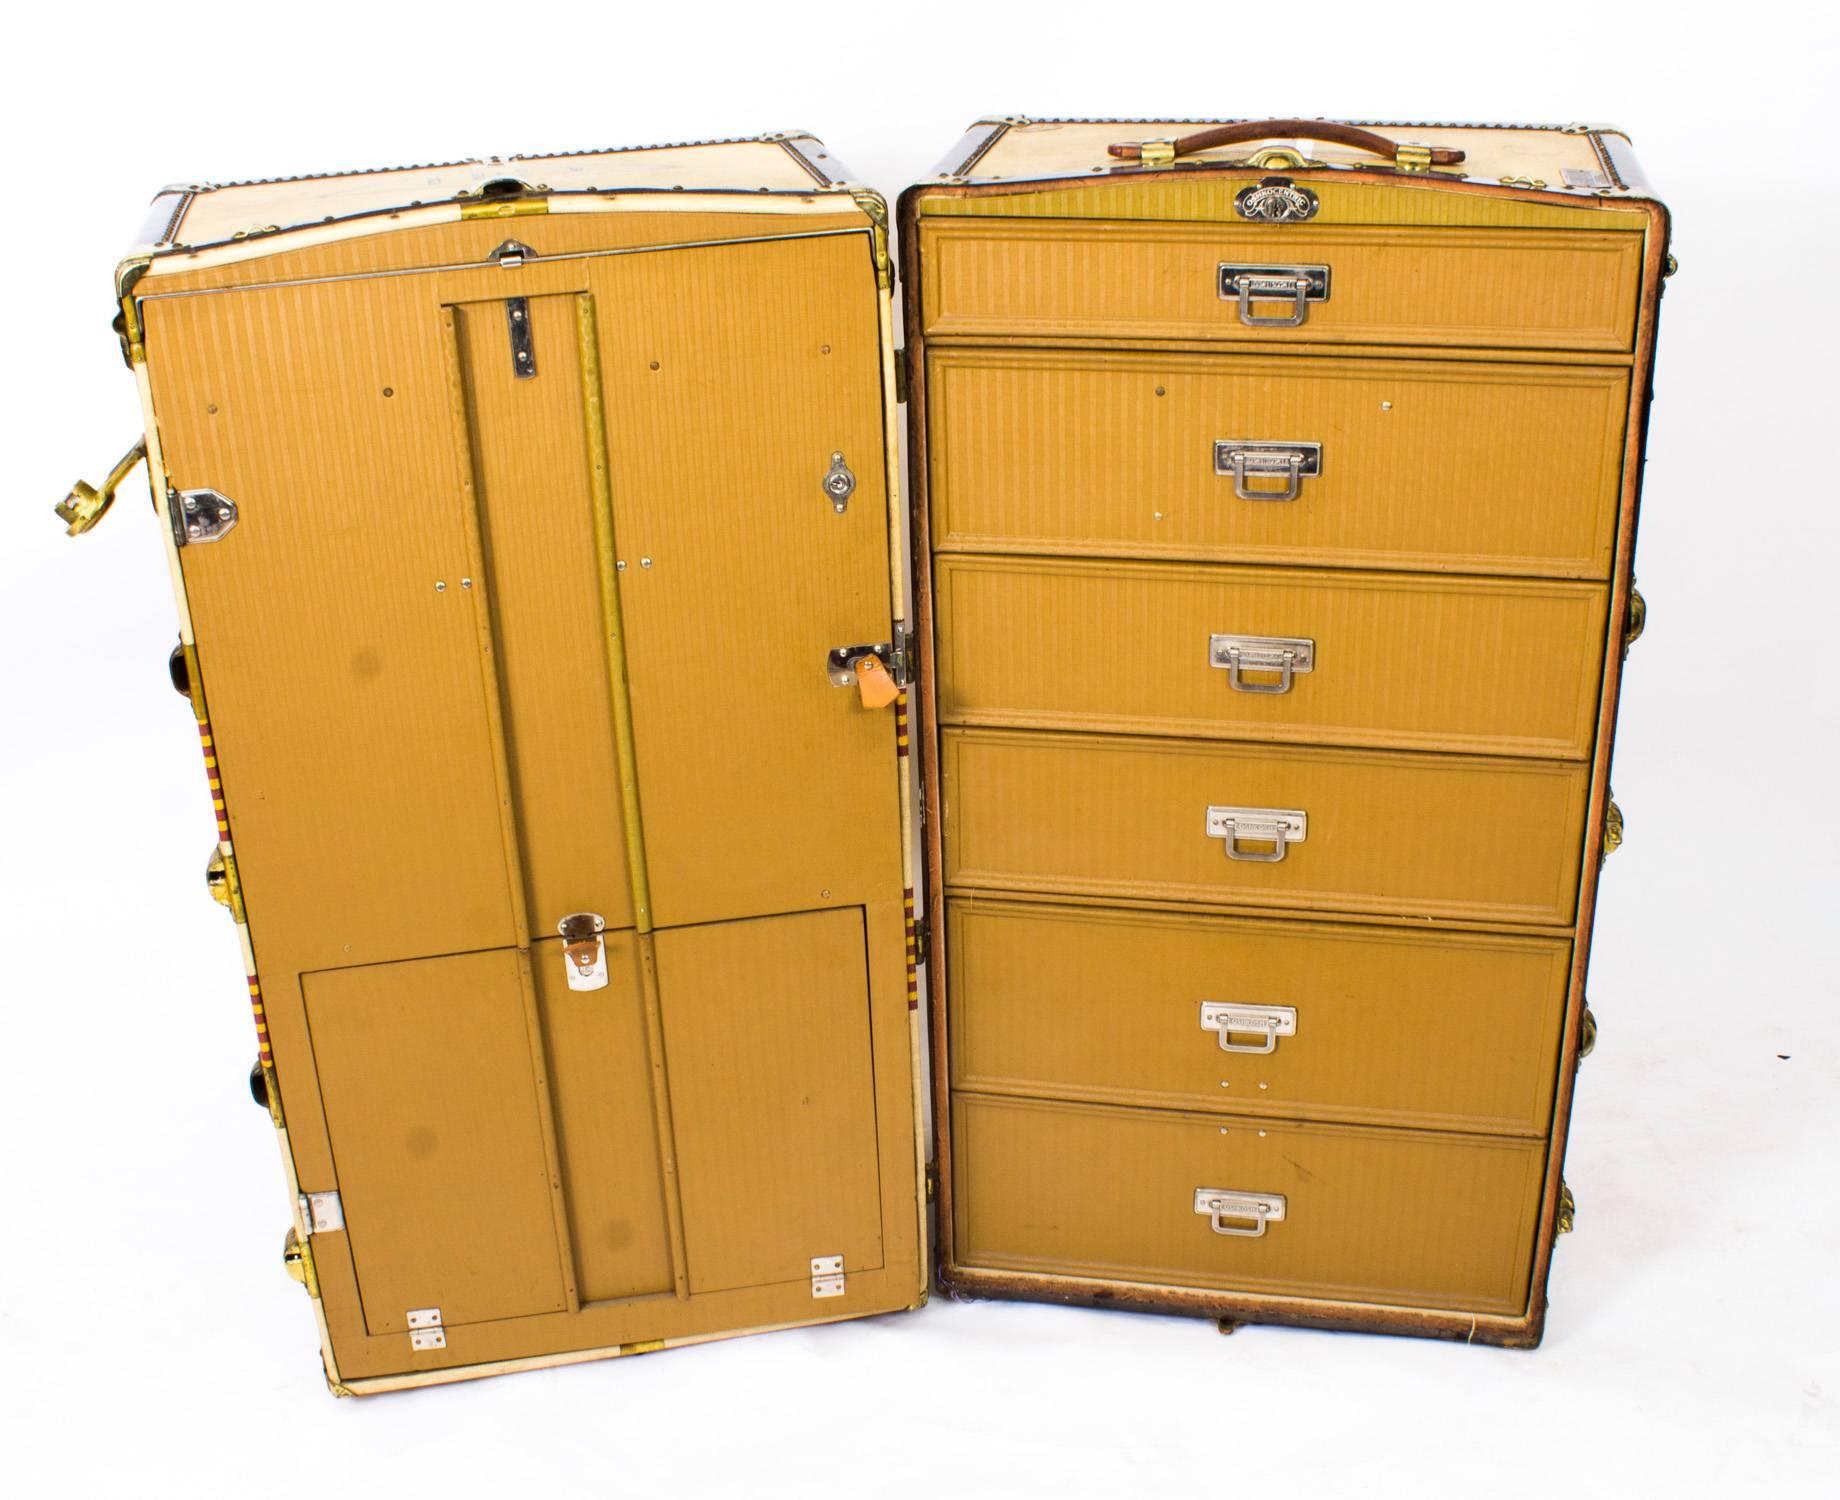 This is an elegant antique Abercrombie & Fitch Oshkosh "Chief" Wardrobe Trunk, circa 1930 in date.

Known for its excellent craftsmanship, superb quality, and amazing distinction, the famous Oshkosh luggage line "Chief"